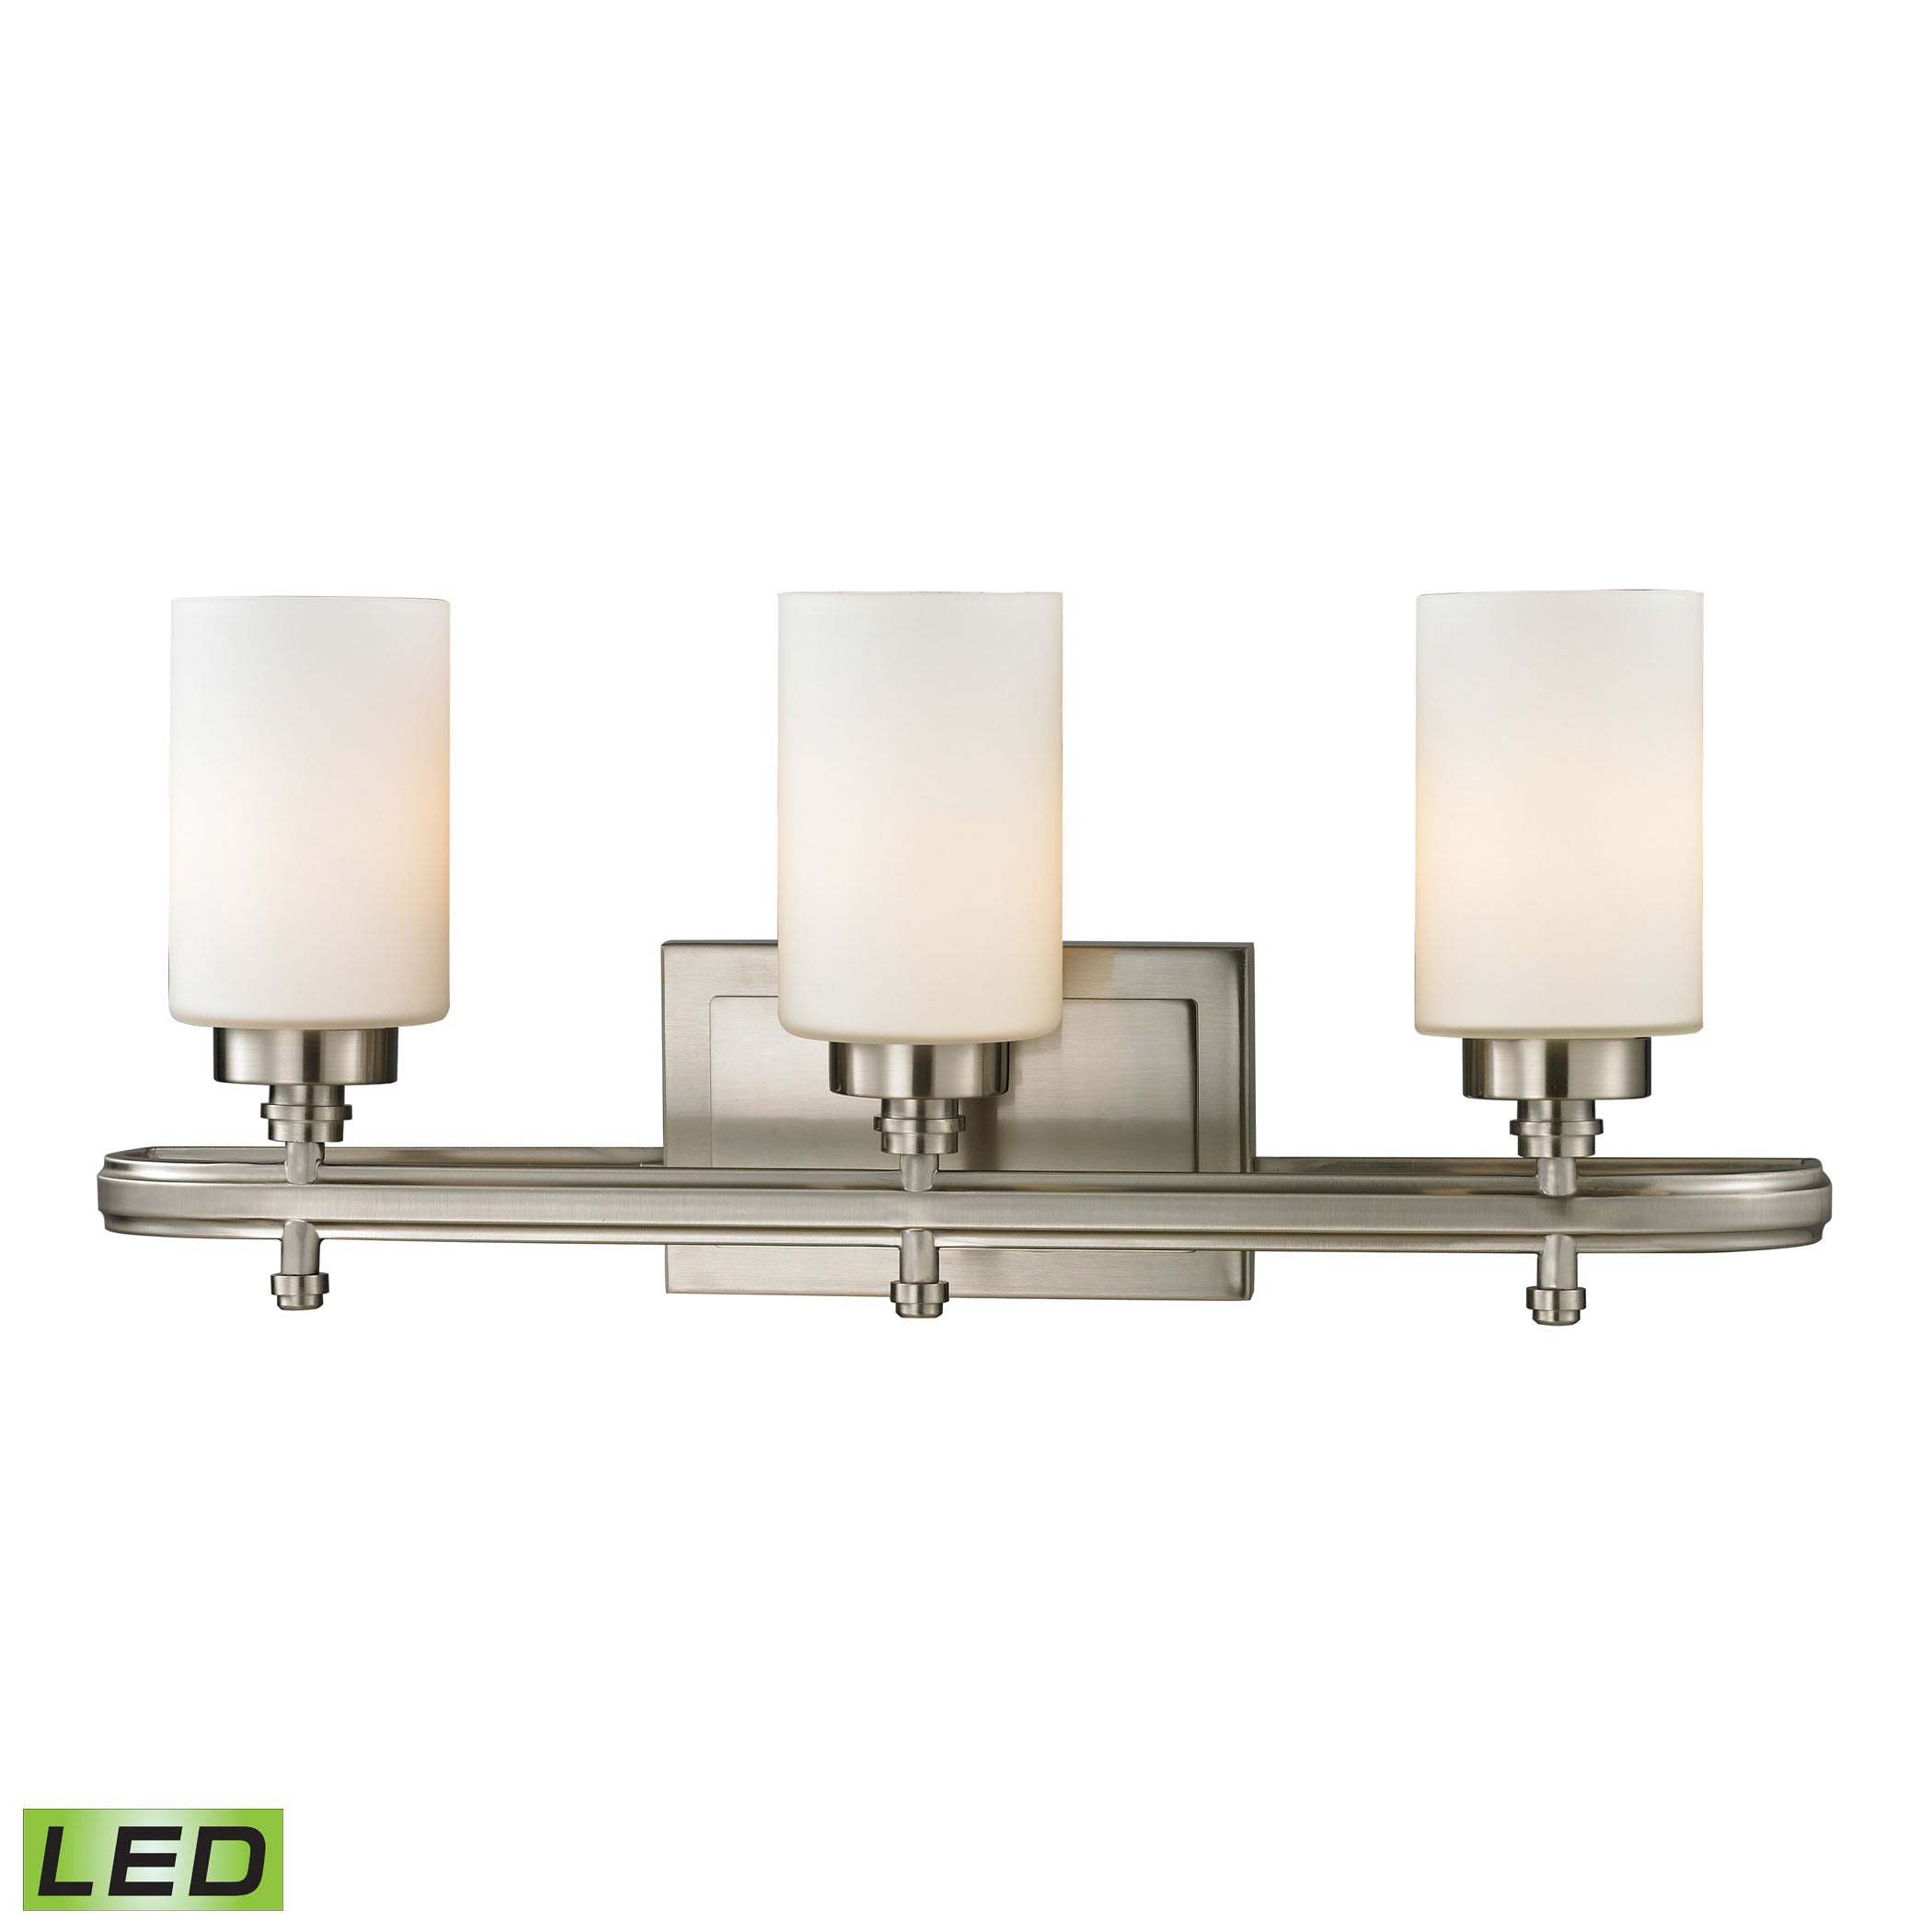 ELK Lighting 11662/3-LED Dawson 3-Light Vanity Lamp in Brushed Nickel with White Glass - Includes LED Bulbs